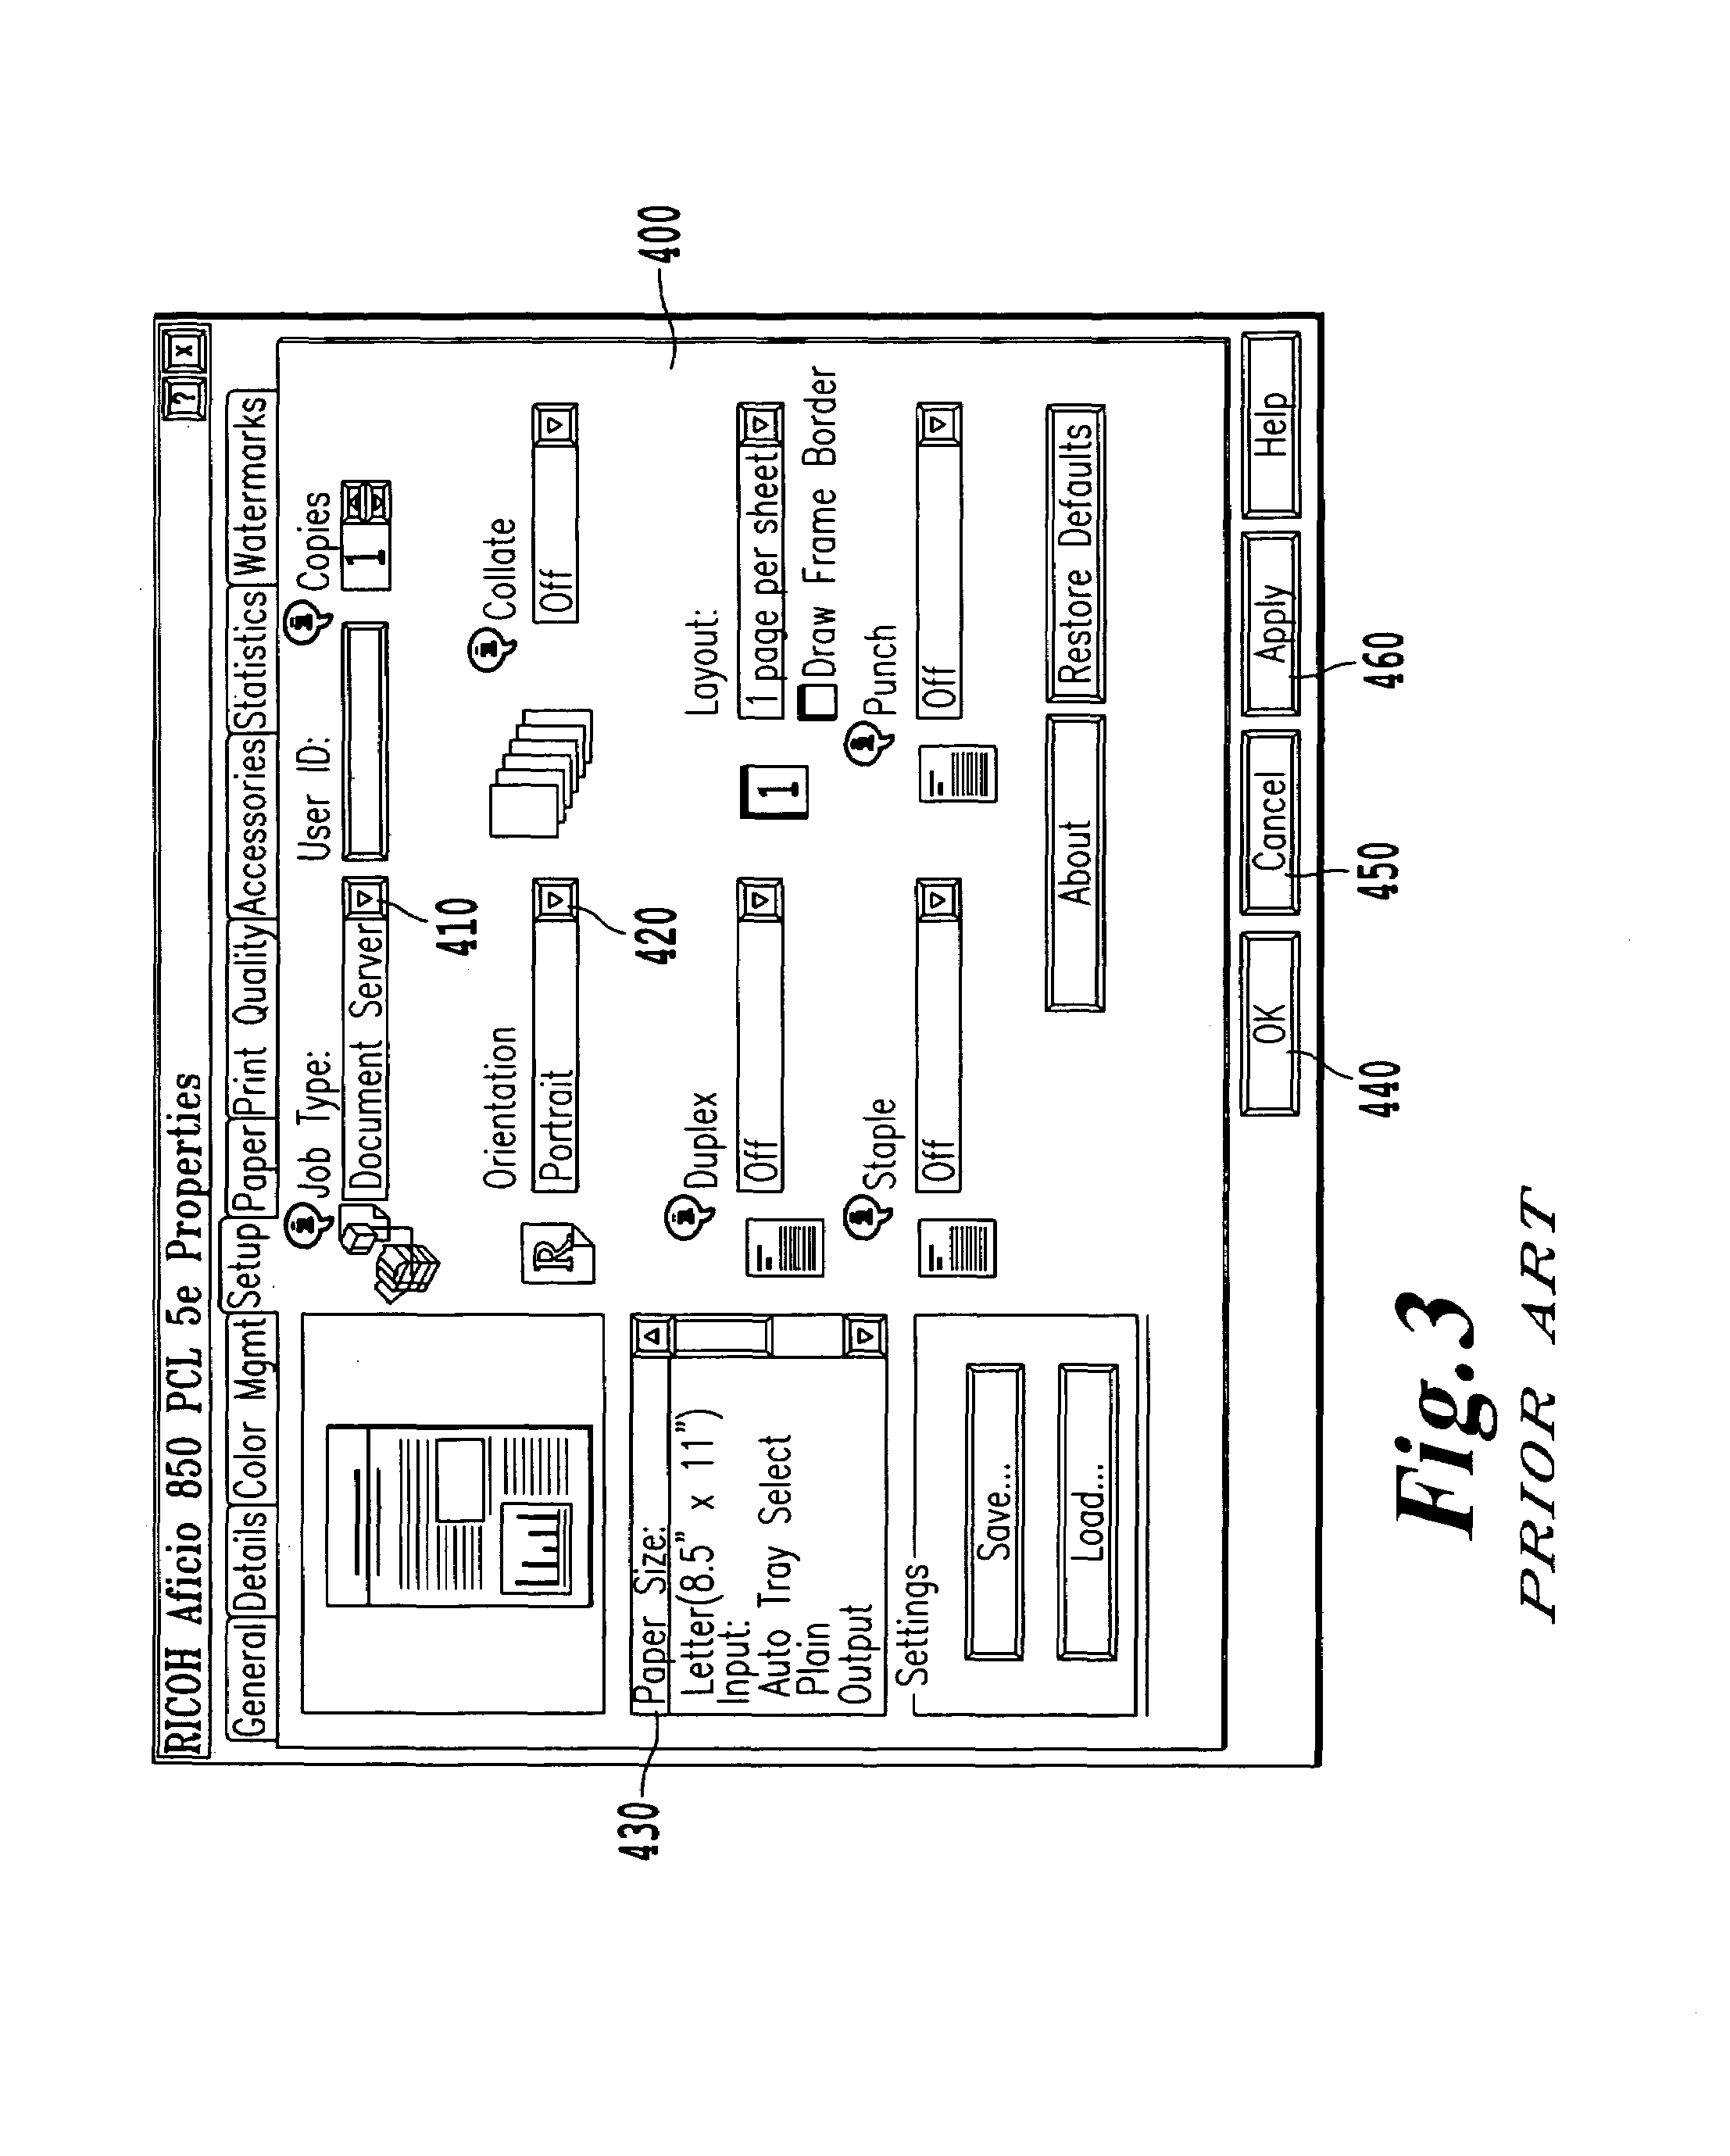 System, method and computer program product for remote managing a document server print job